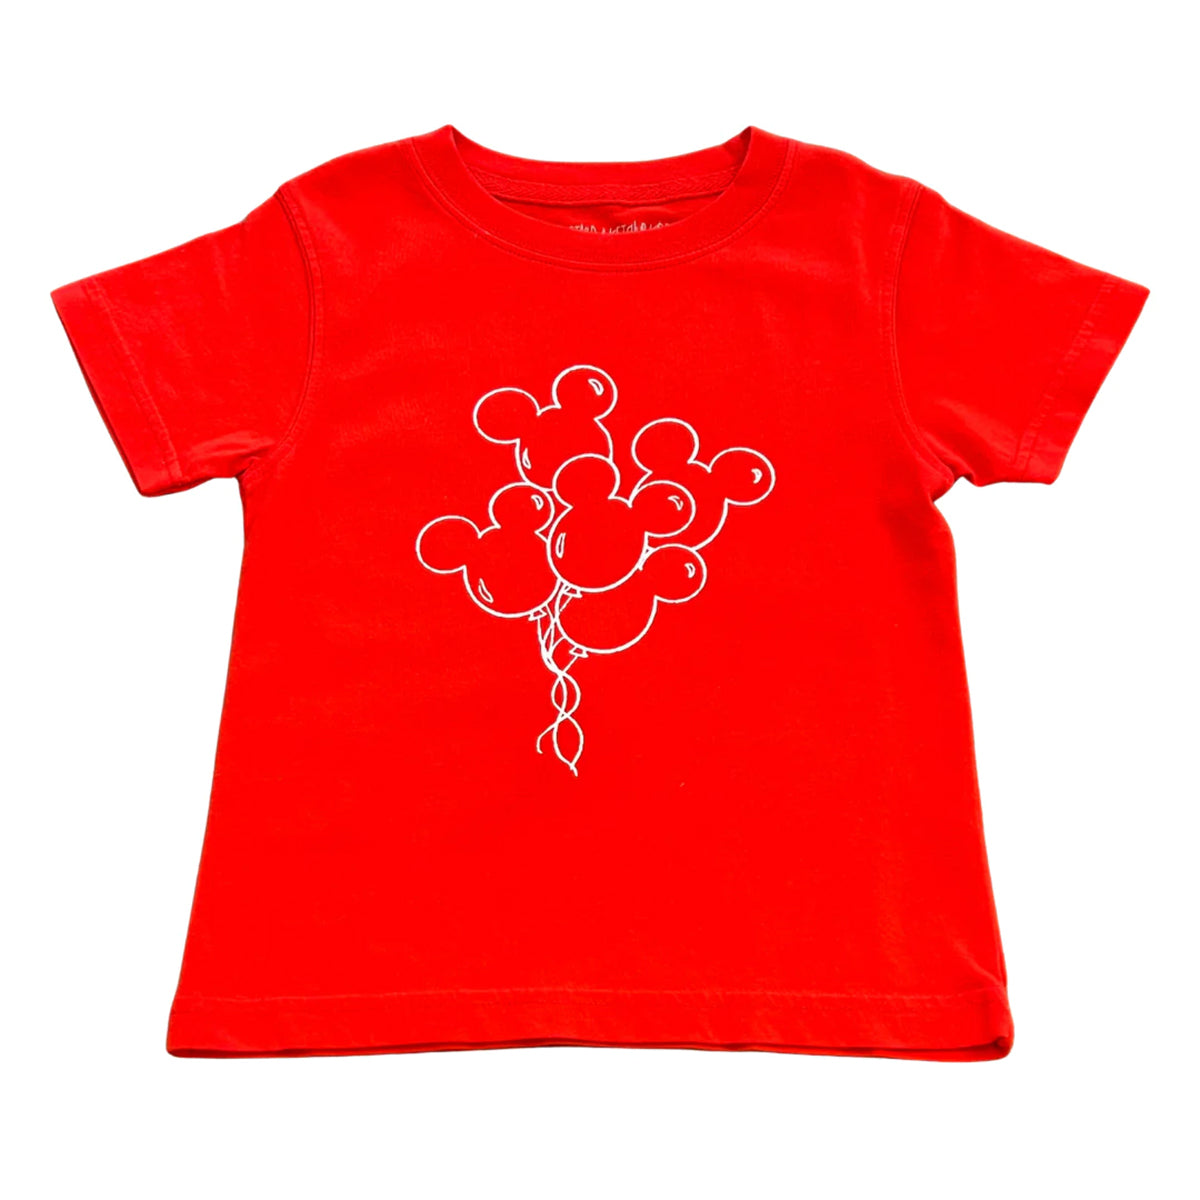 Mustard & Ketchup Kids Mouse Balloons on Red Tee